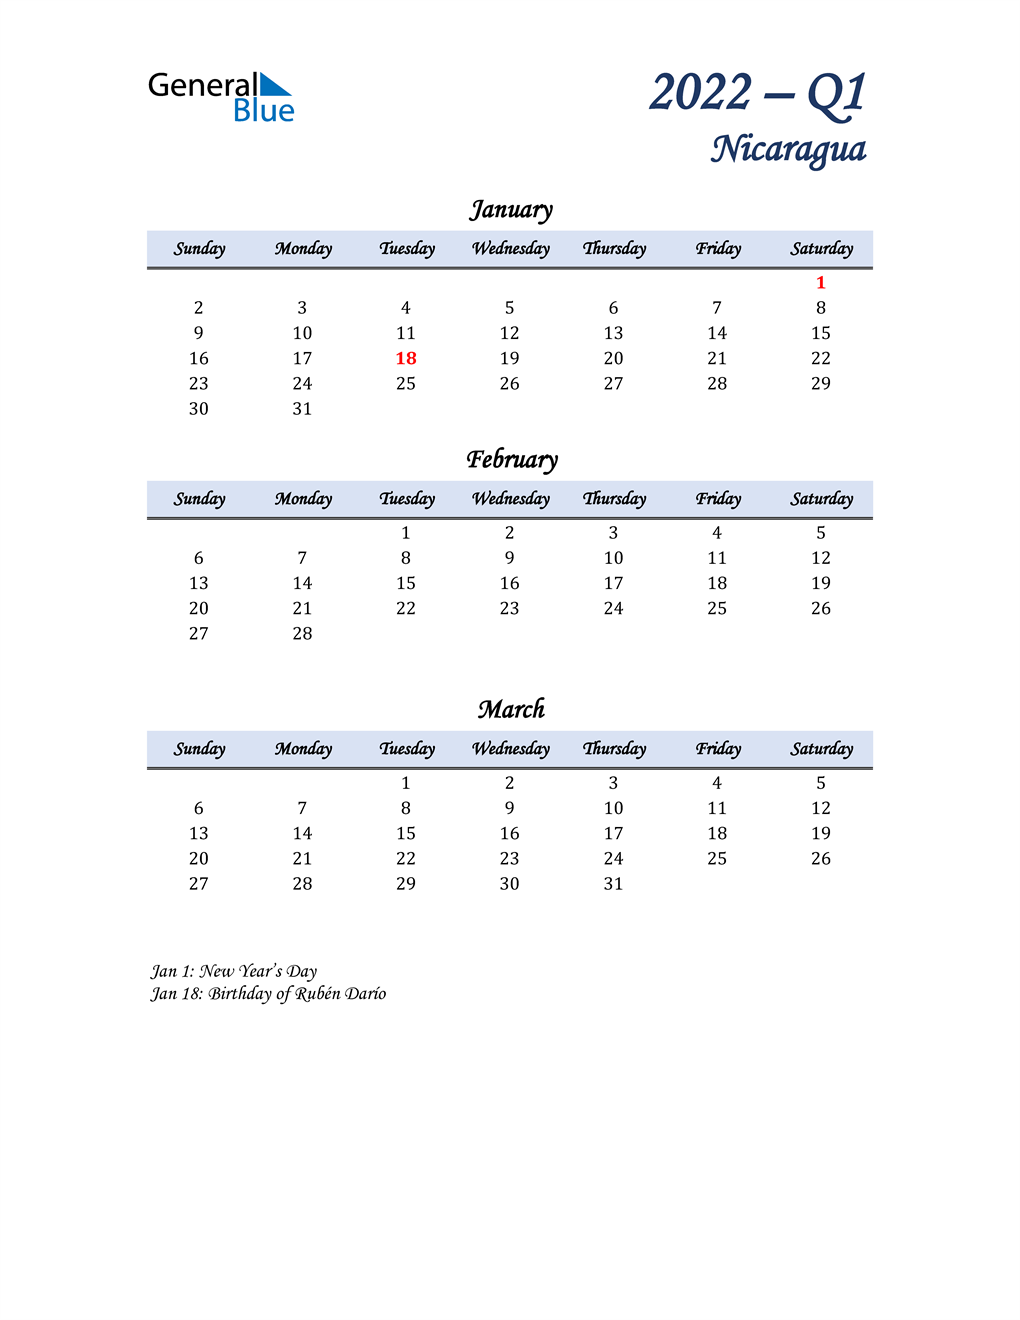  January, February, and March Calendar for Nicaragua